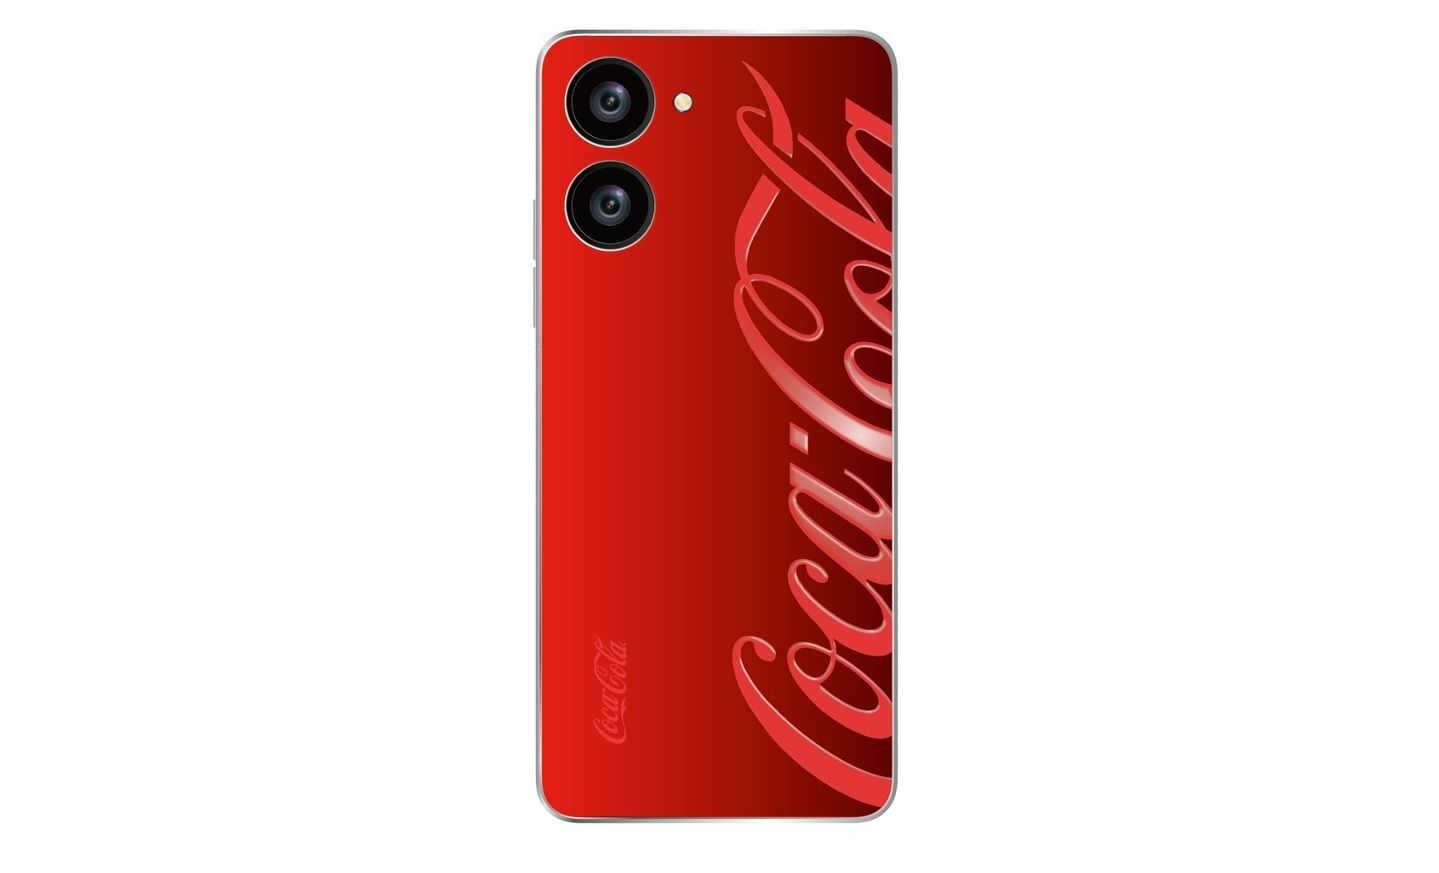 androidpolice.com - Jay Bonggolto - Realme teases an Android phone for all Coca-Cola lovers out there